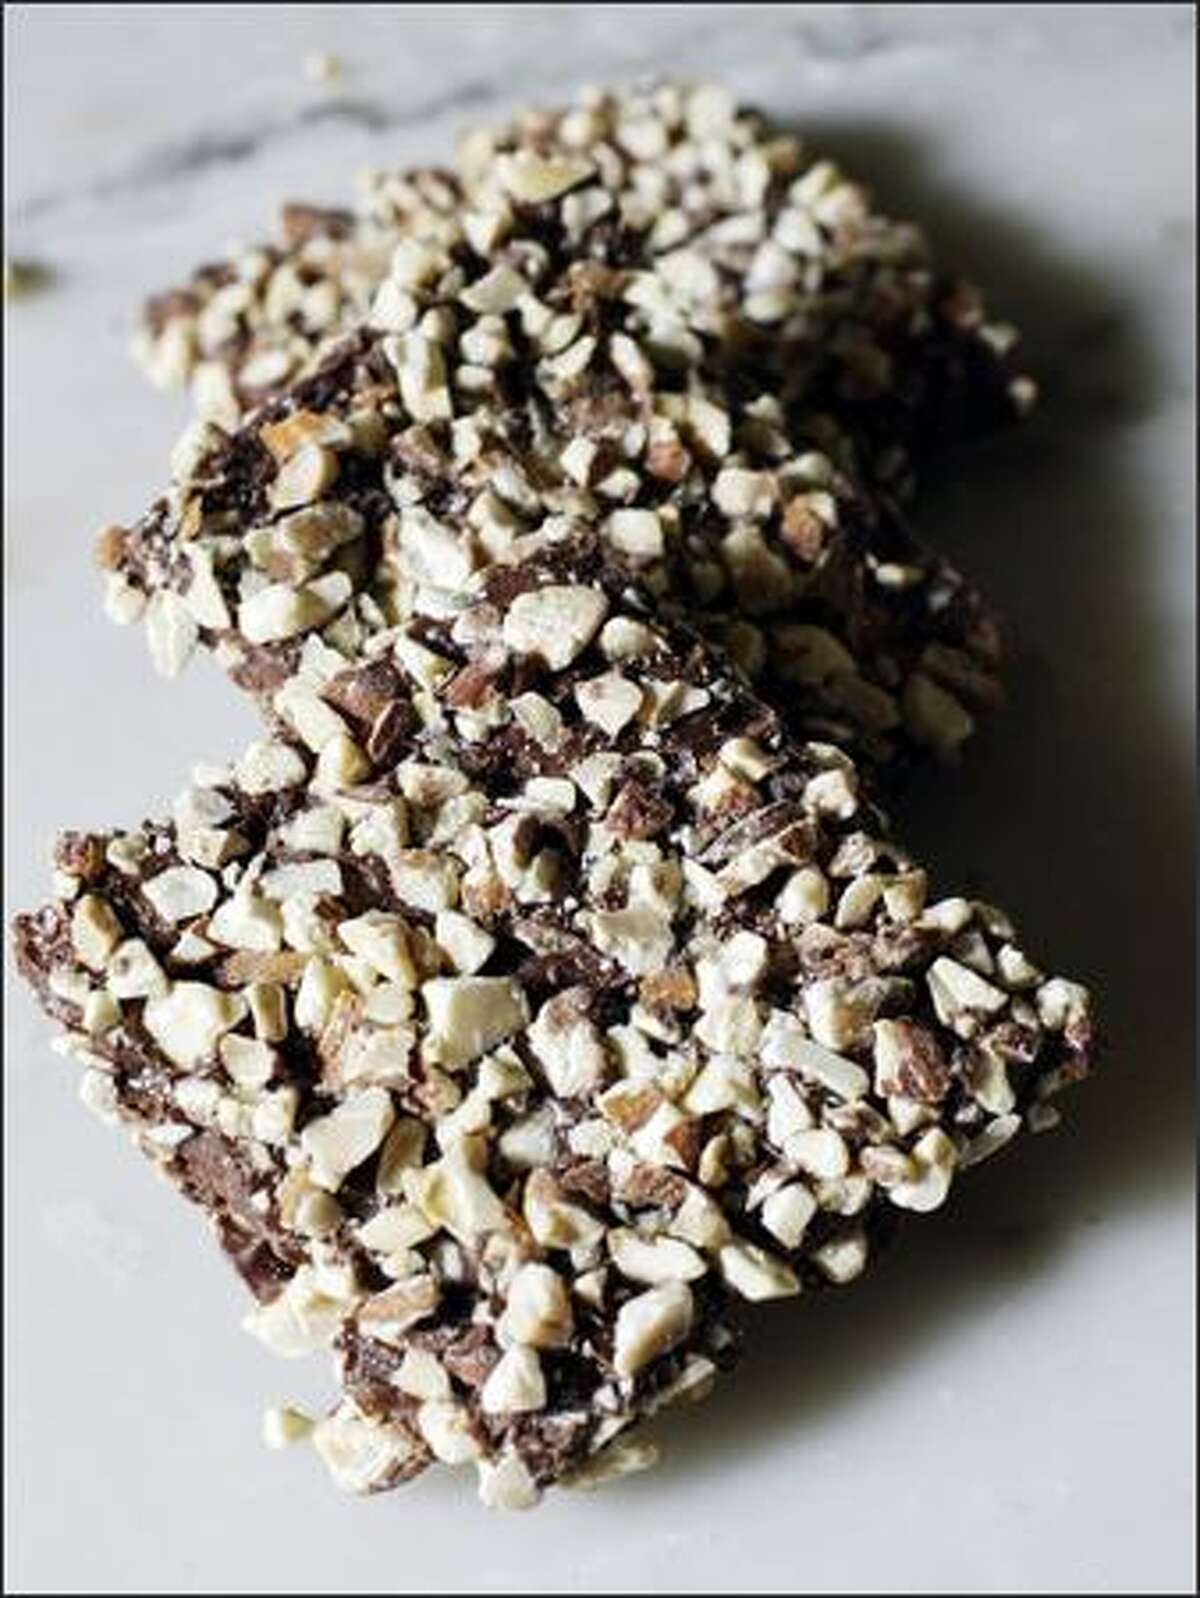 English toffee Cost: $23.90 per pound Where: Rocky Mountain Chocolate Factory, 1419 First Ave.; 206-262-9581 Why: One bite of the chocolate- and nut-coated toffee will cause your eyes to roll back in pleasure. It’s rich but not overpowering.